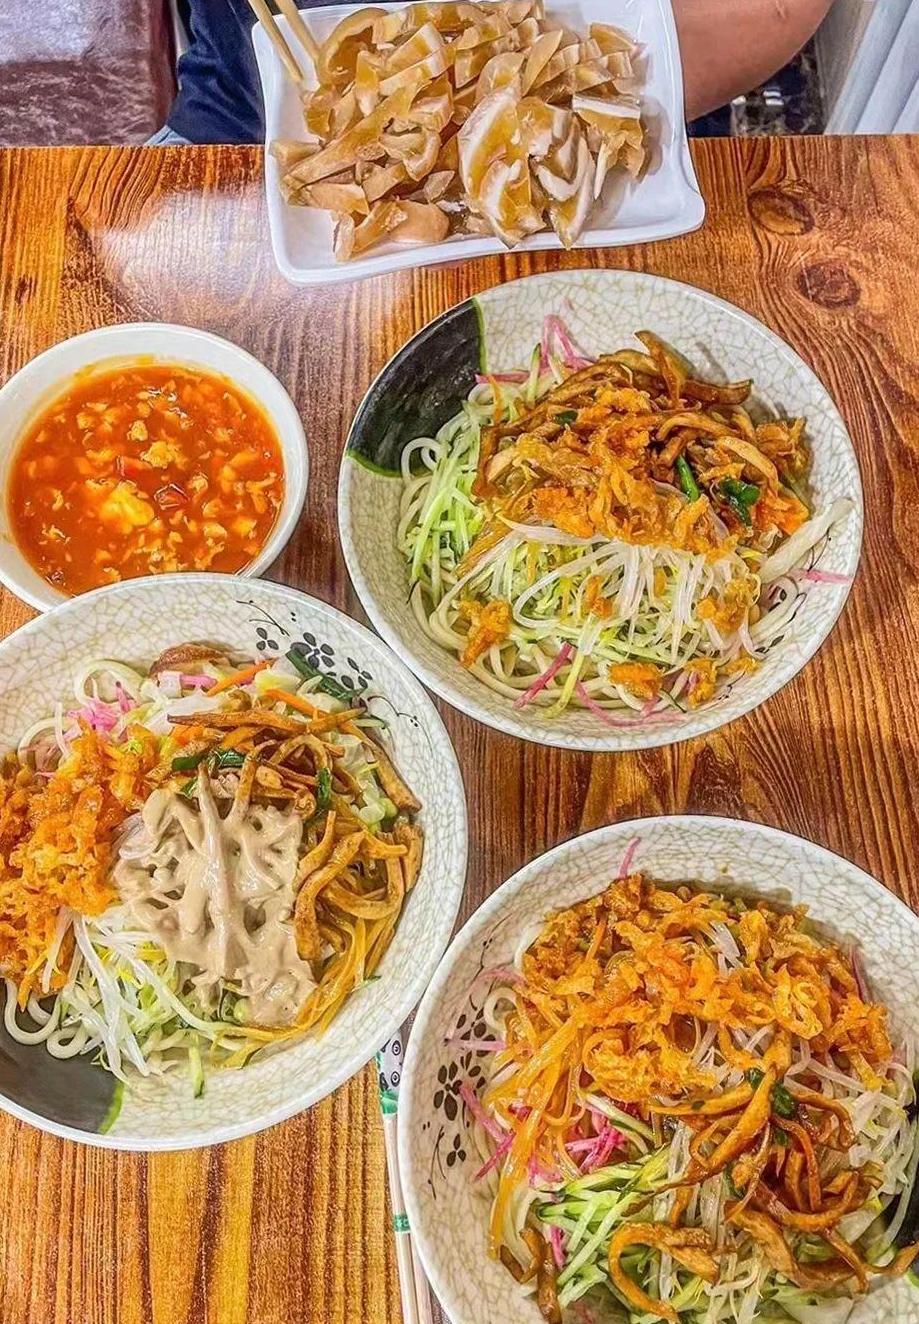 When it's too hot, Tianjin people's lives are given by noodles with sesame sauce